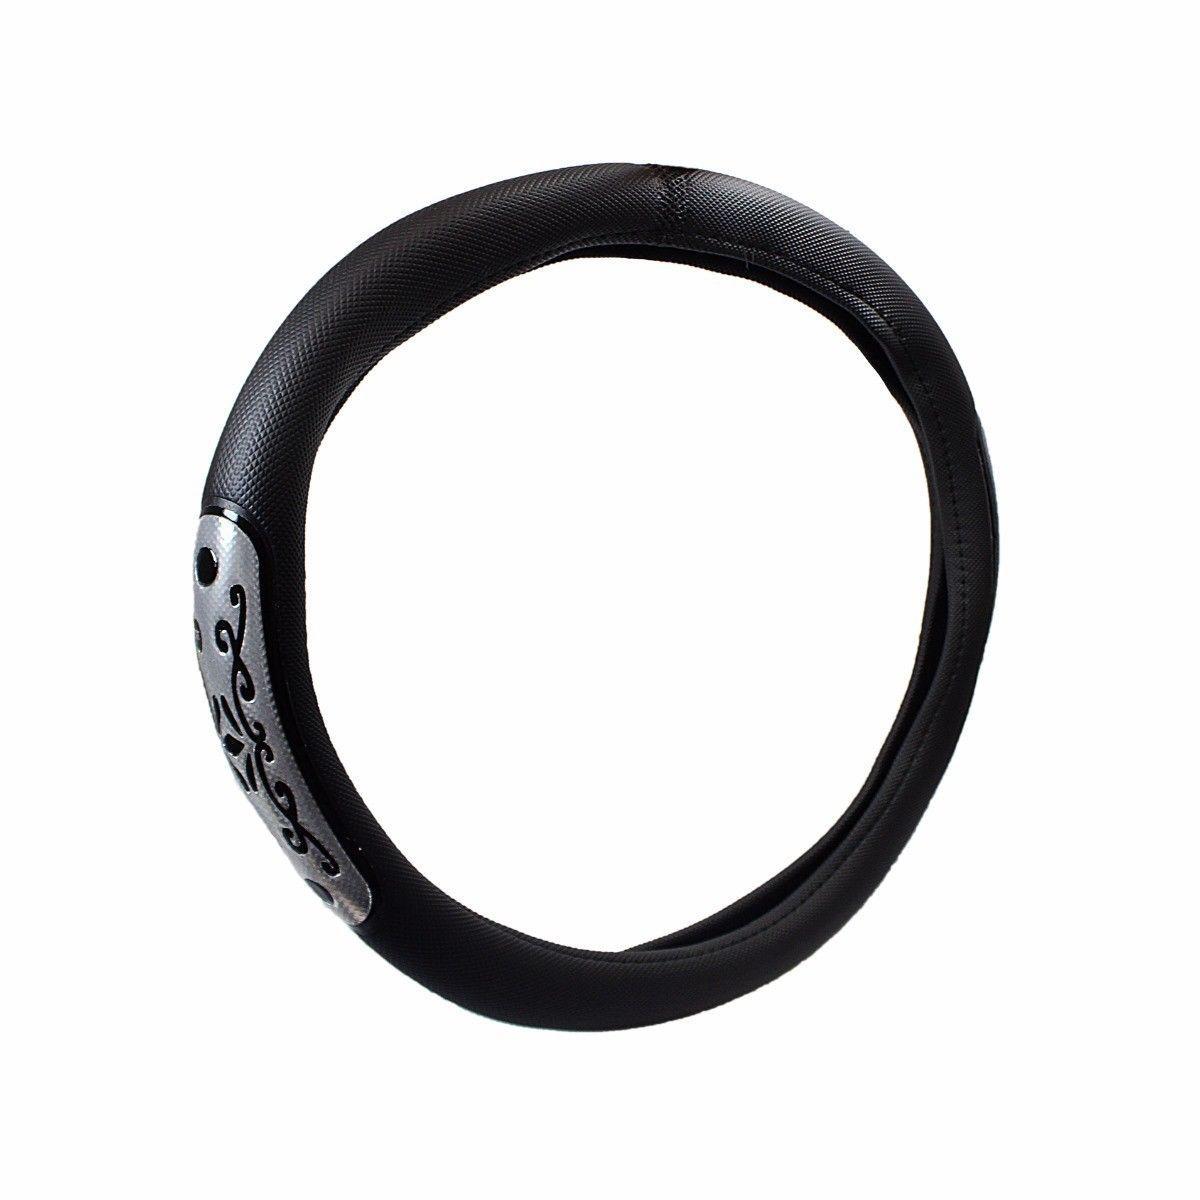 Steering Wheel Cover Fits Most Cars 14-15.1/2'' Just Stretch Over Steering Wheel   2178 (Parcel Rate)